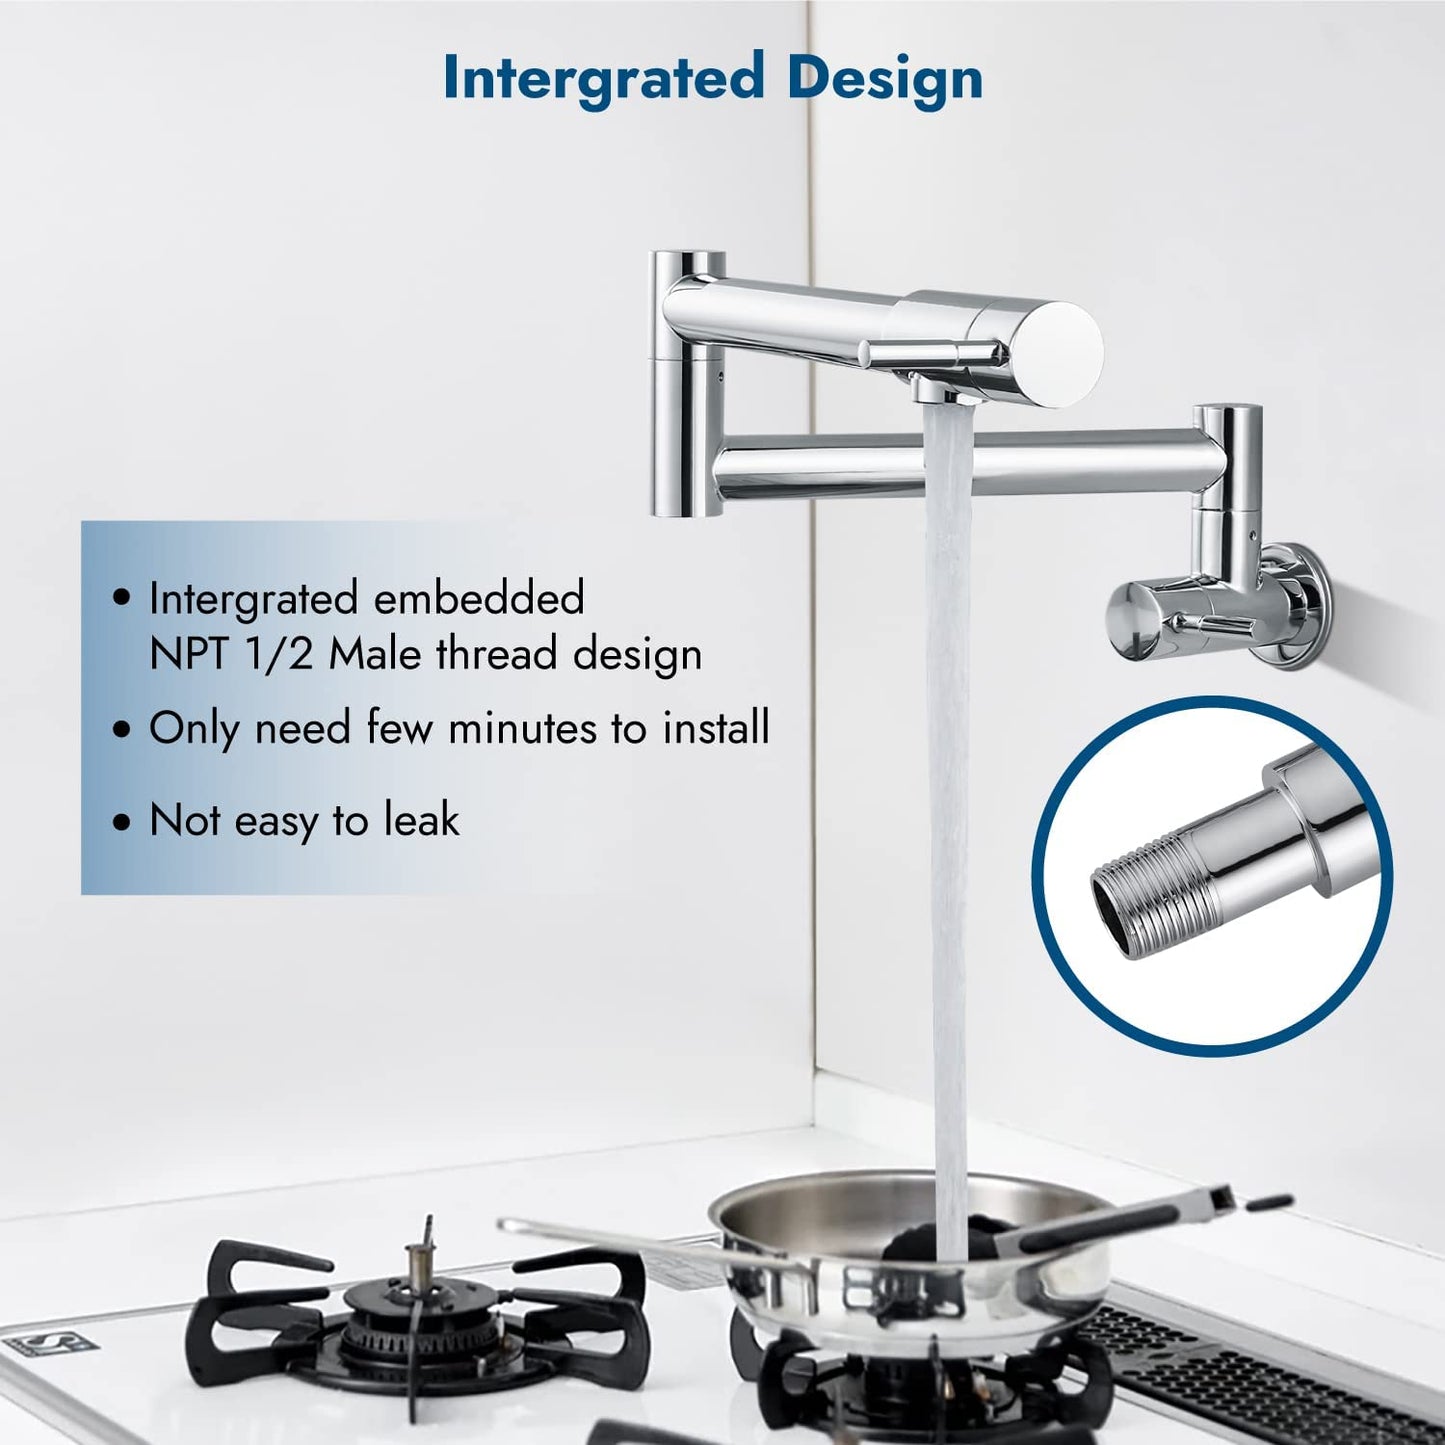 
                  
                    Cinwiny Pot Filler Wall Mounted Folding Stretchable Kitchen Restaurant Sink Faucet with Double Joint Swing Arm Single Hole Two Handles Commercial NPT Stainless Steel
                  
                